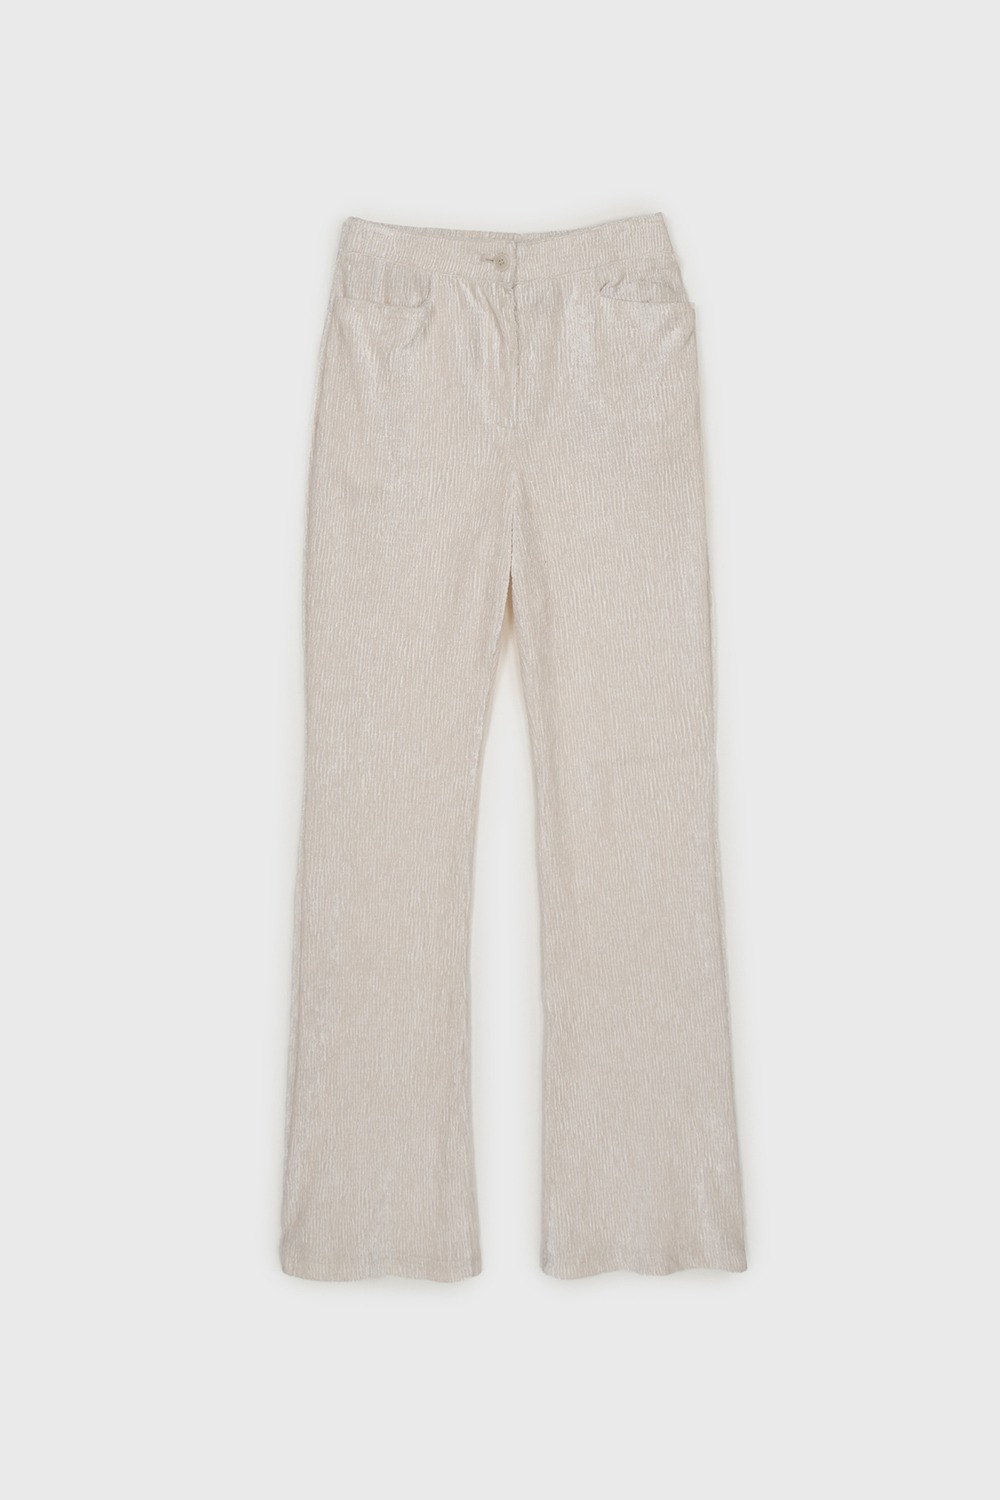 MUSED BOOTSCUT PANTS - IVORY